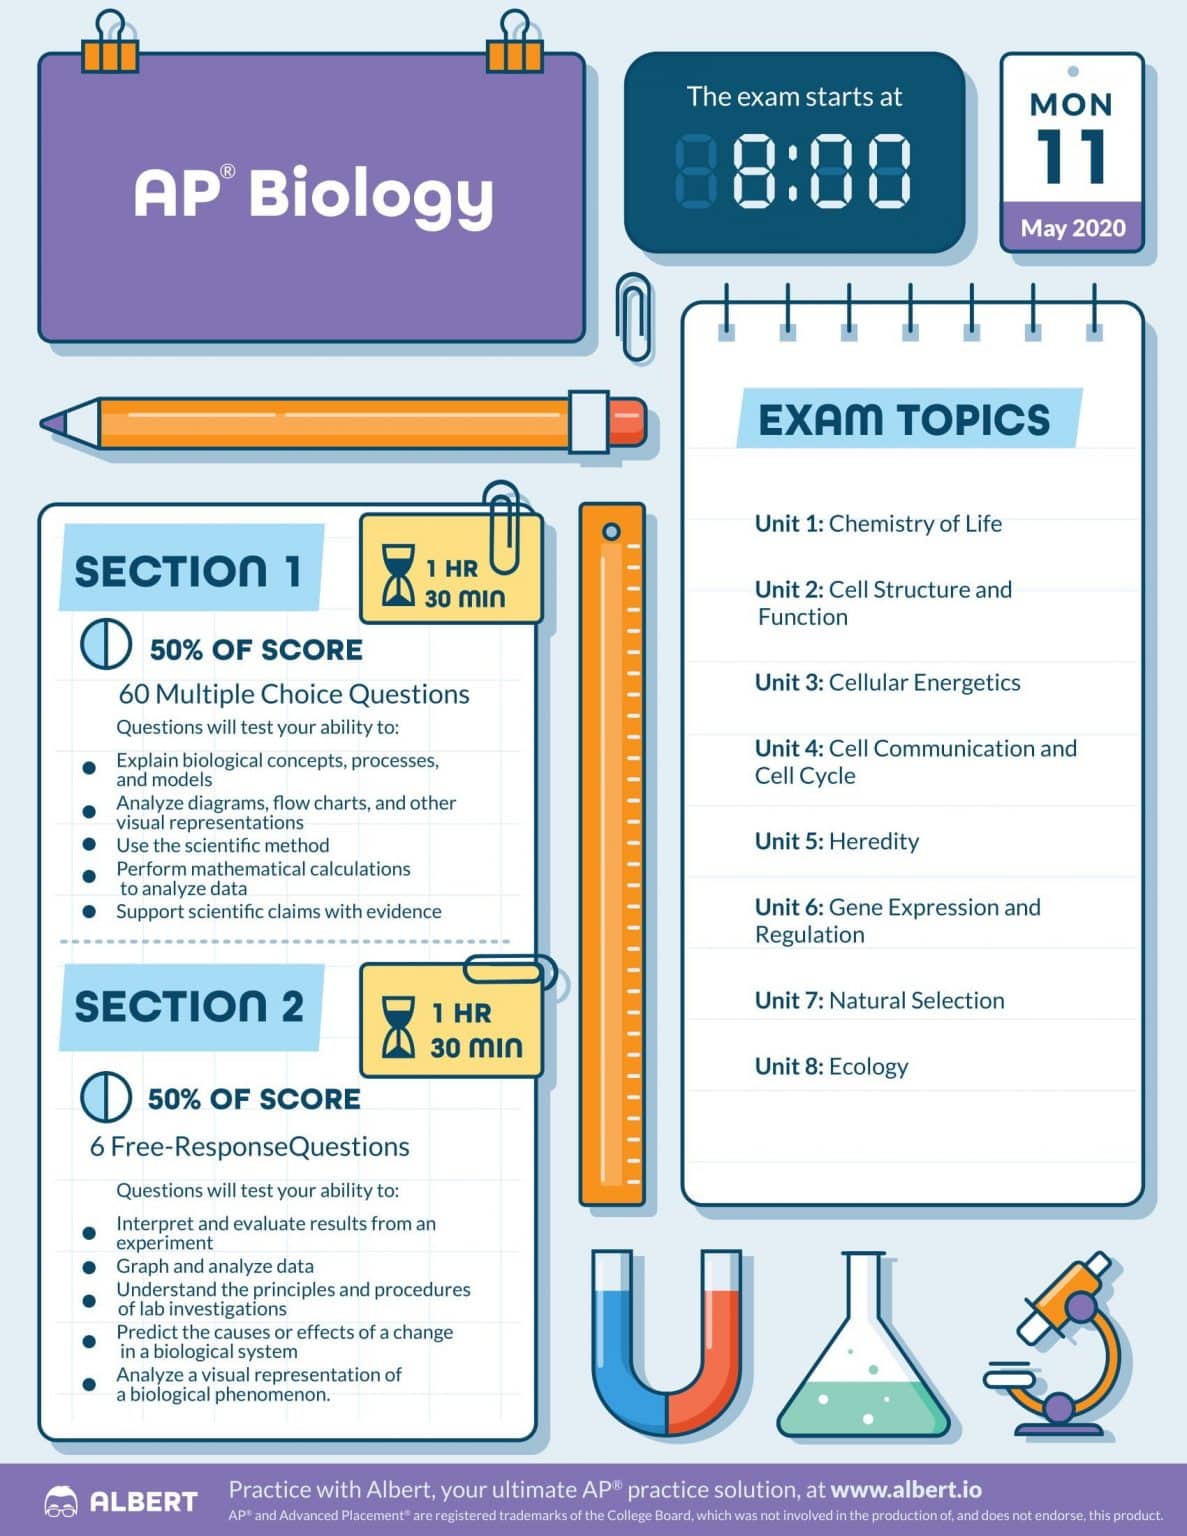 Success Guide to the AP Biology Exam AdmissionSight